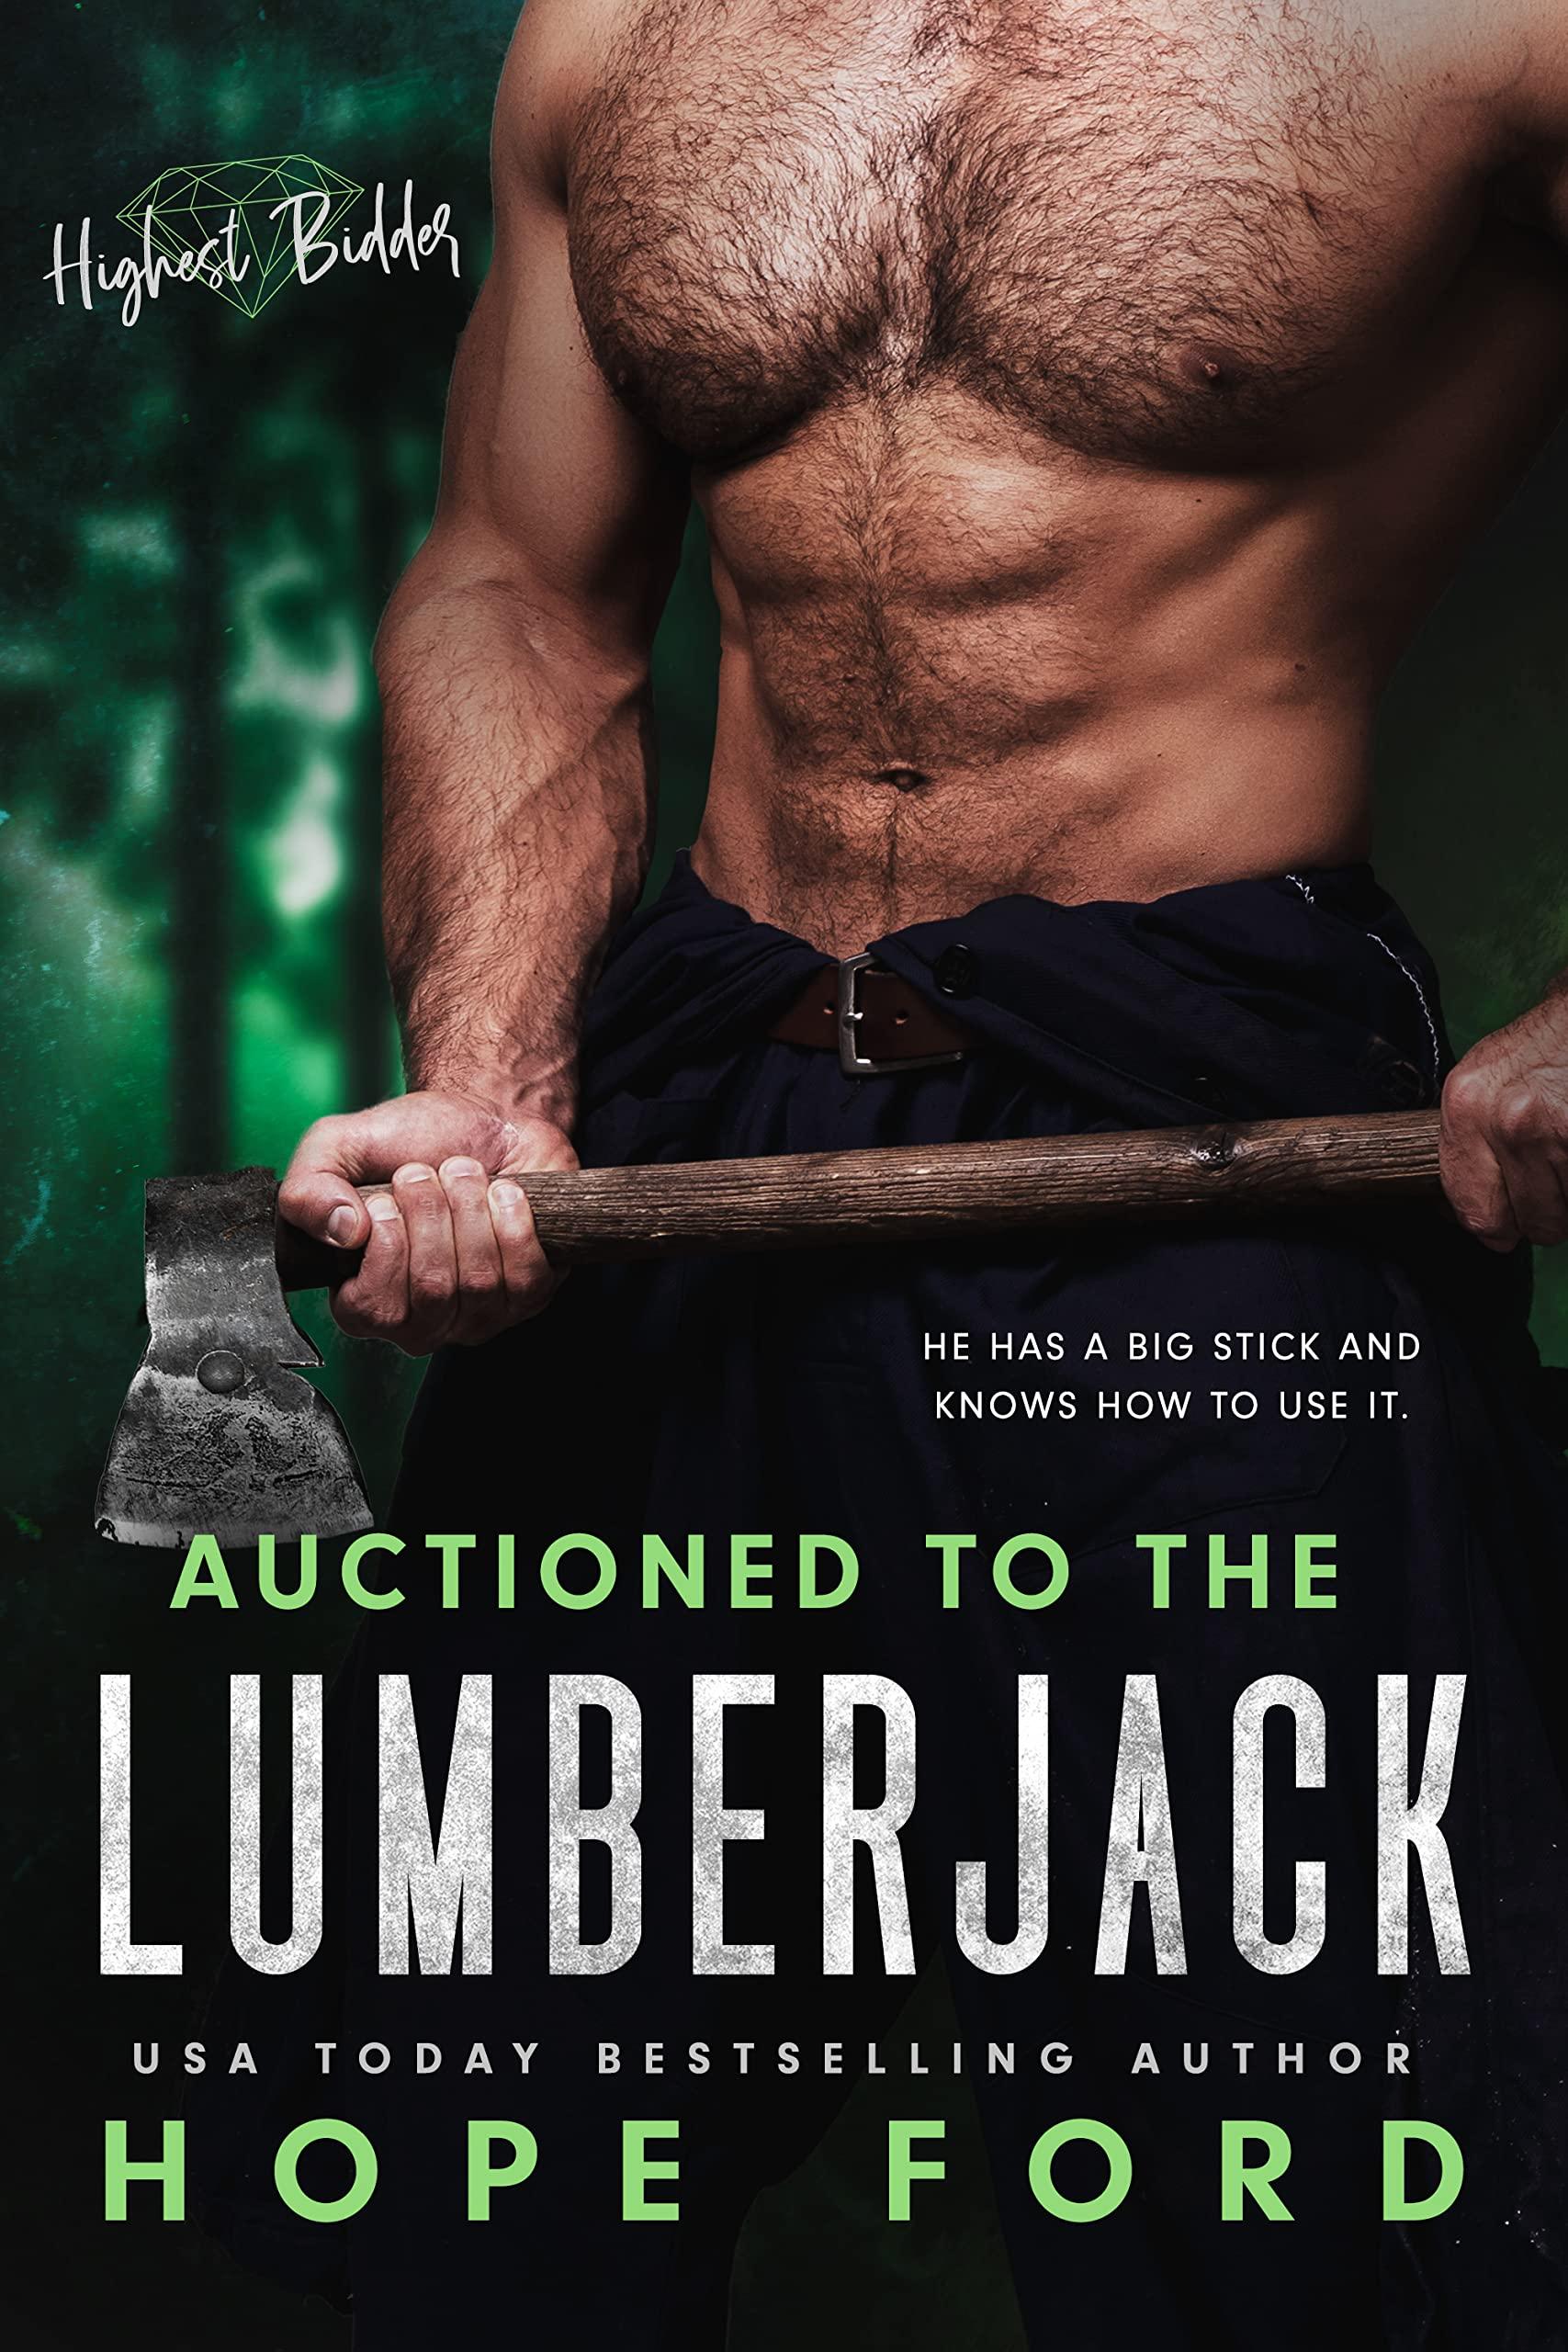 Auctioned to the Lumberjack